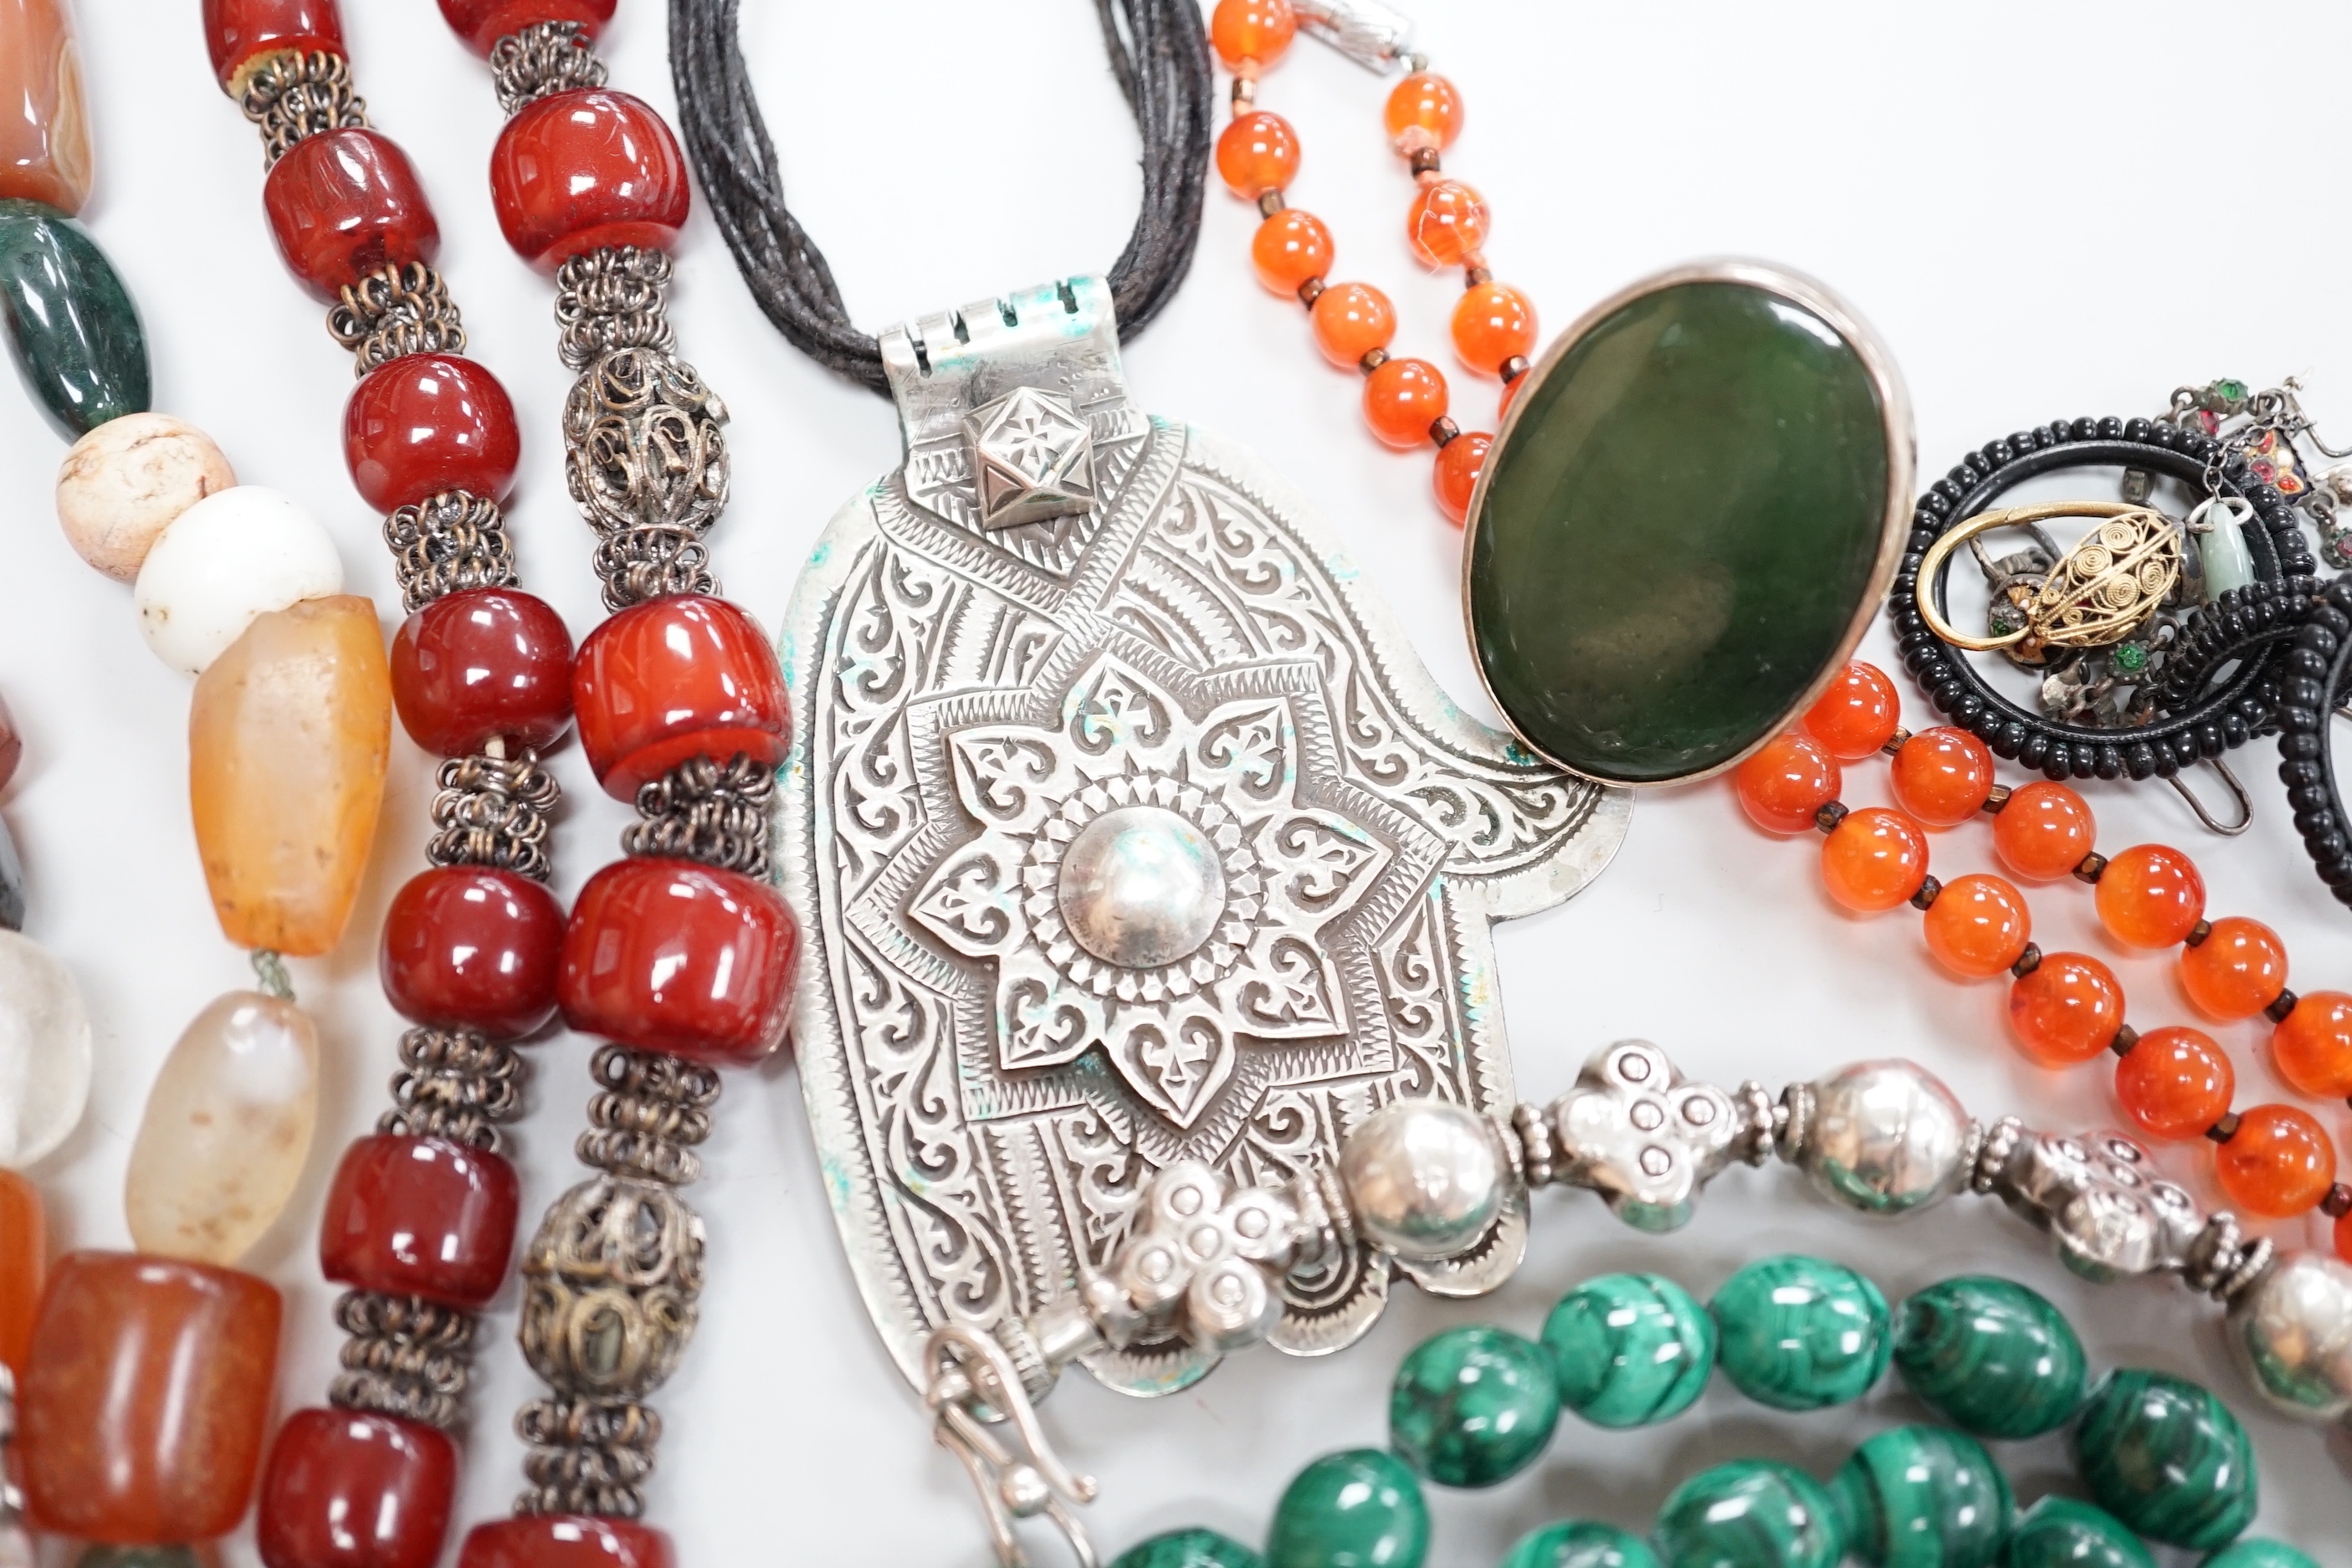 Assorted jewellery including a South American? white metal fringe necklace, a malachite bead necklace, amber earrings, filigree earrings, jet earrings, Hand Of Fatma pendant, agate bead necklace, hardstone pebble necklac